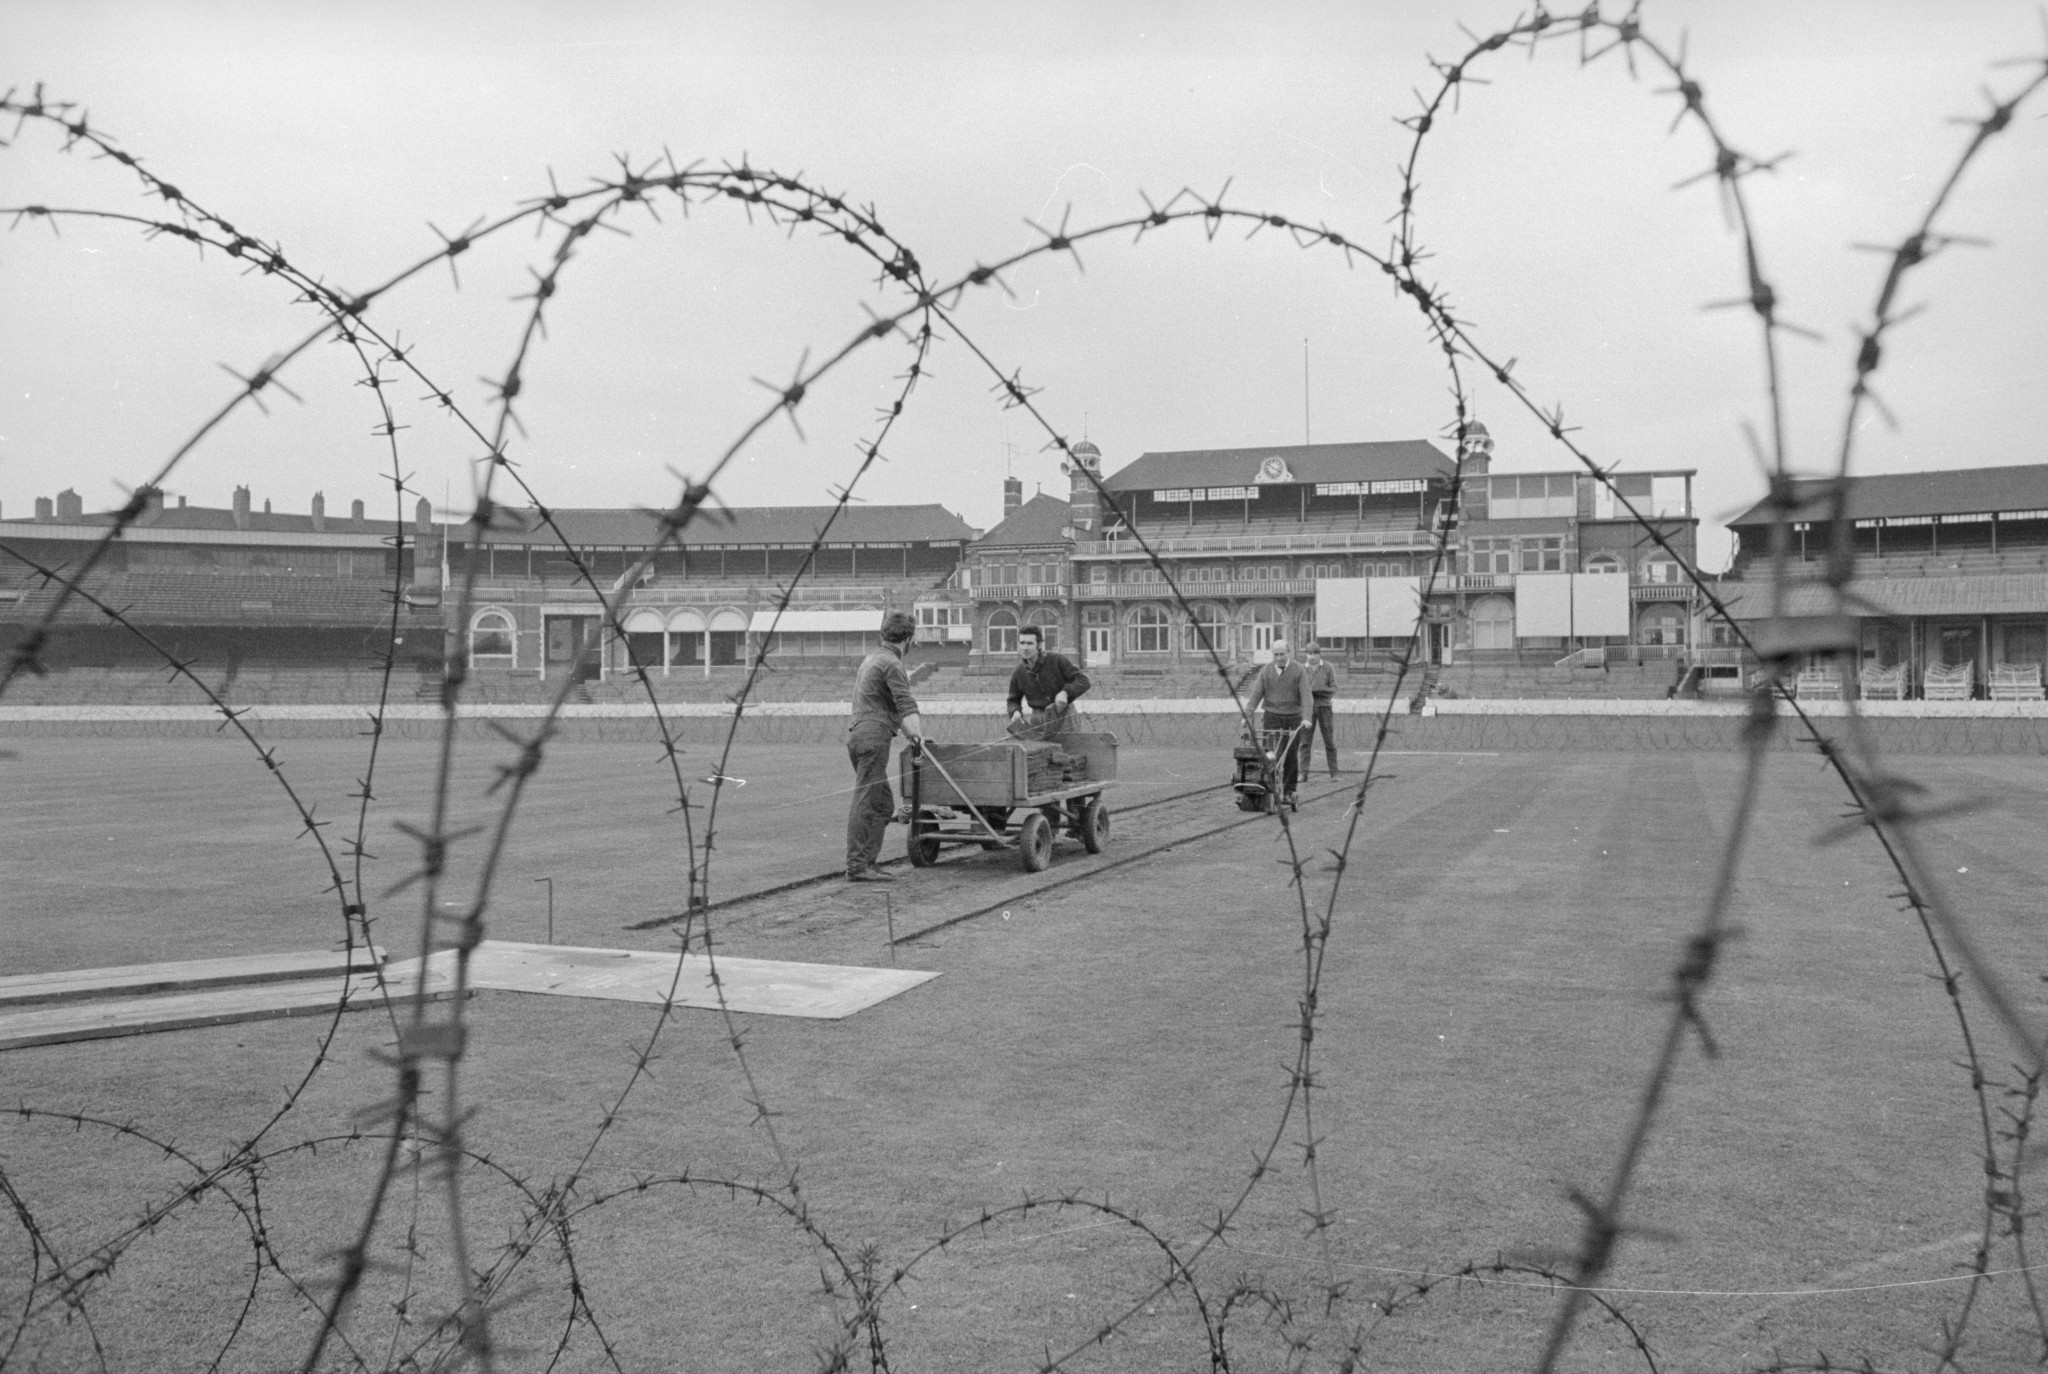 In 1970, the threat of protests against the South African cricket tour prompted many grounds to put up barbed wire barriers ©Getty Images